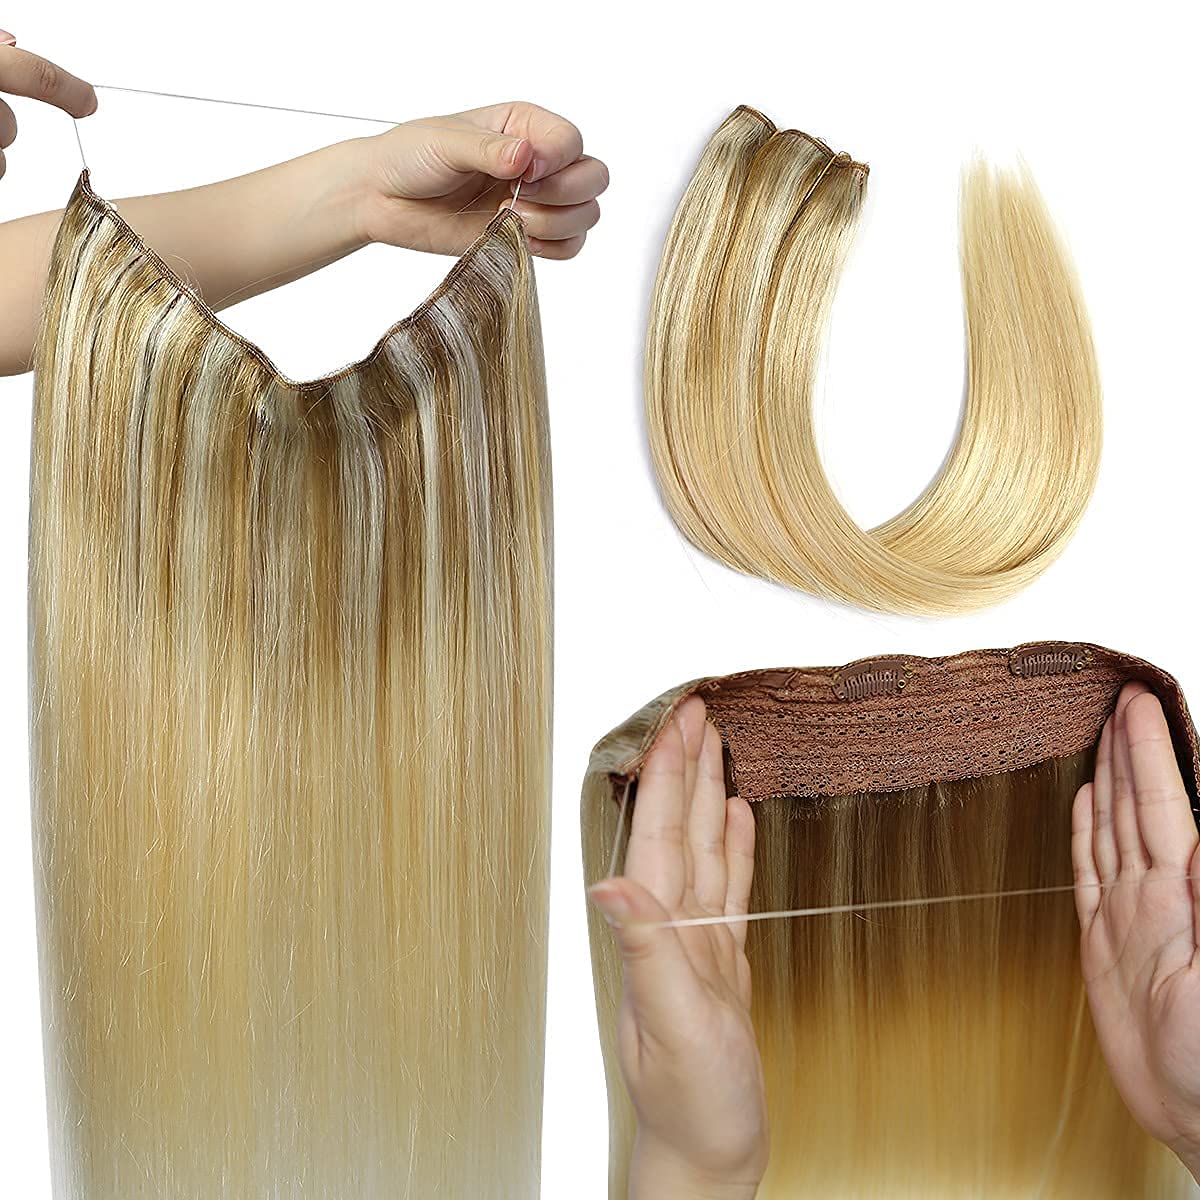 Haloo Hair Extensions Real Human Hair Ash Blonde to Golden 12 inch 2.45 OZ Hairpieces for Women Invisible Wire Fish Line Hair Extensions Straight Human Filp Hair Extensions